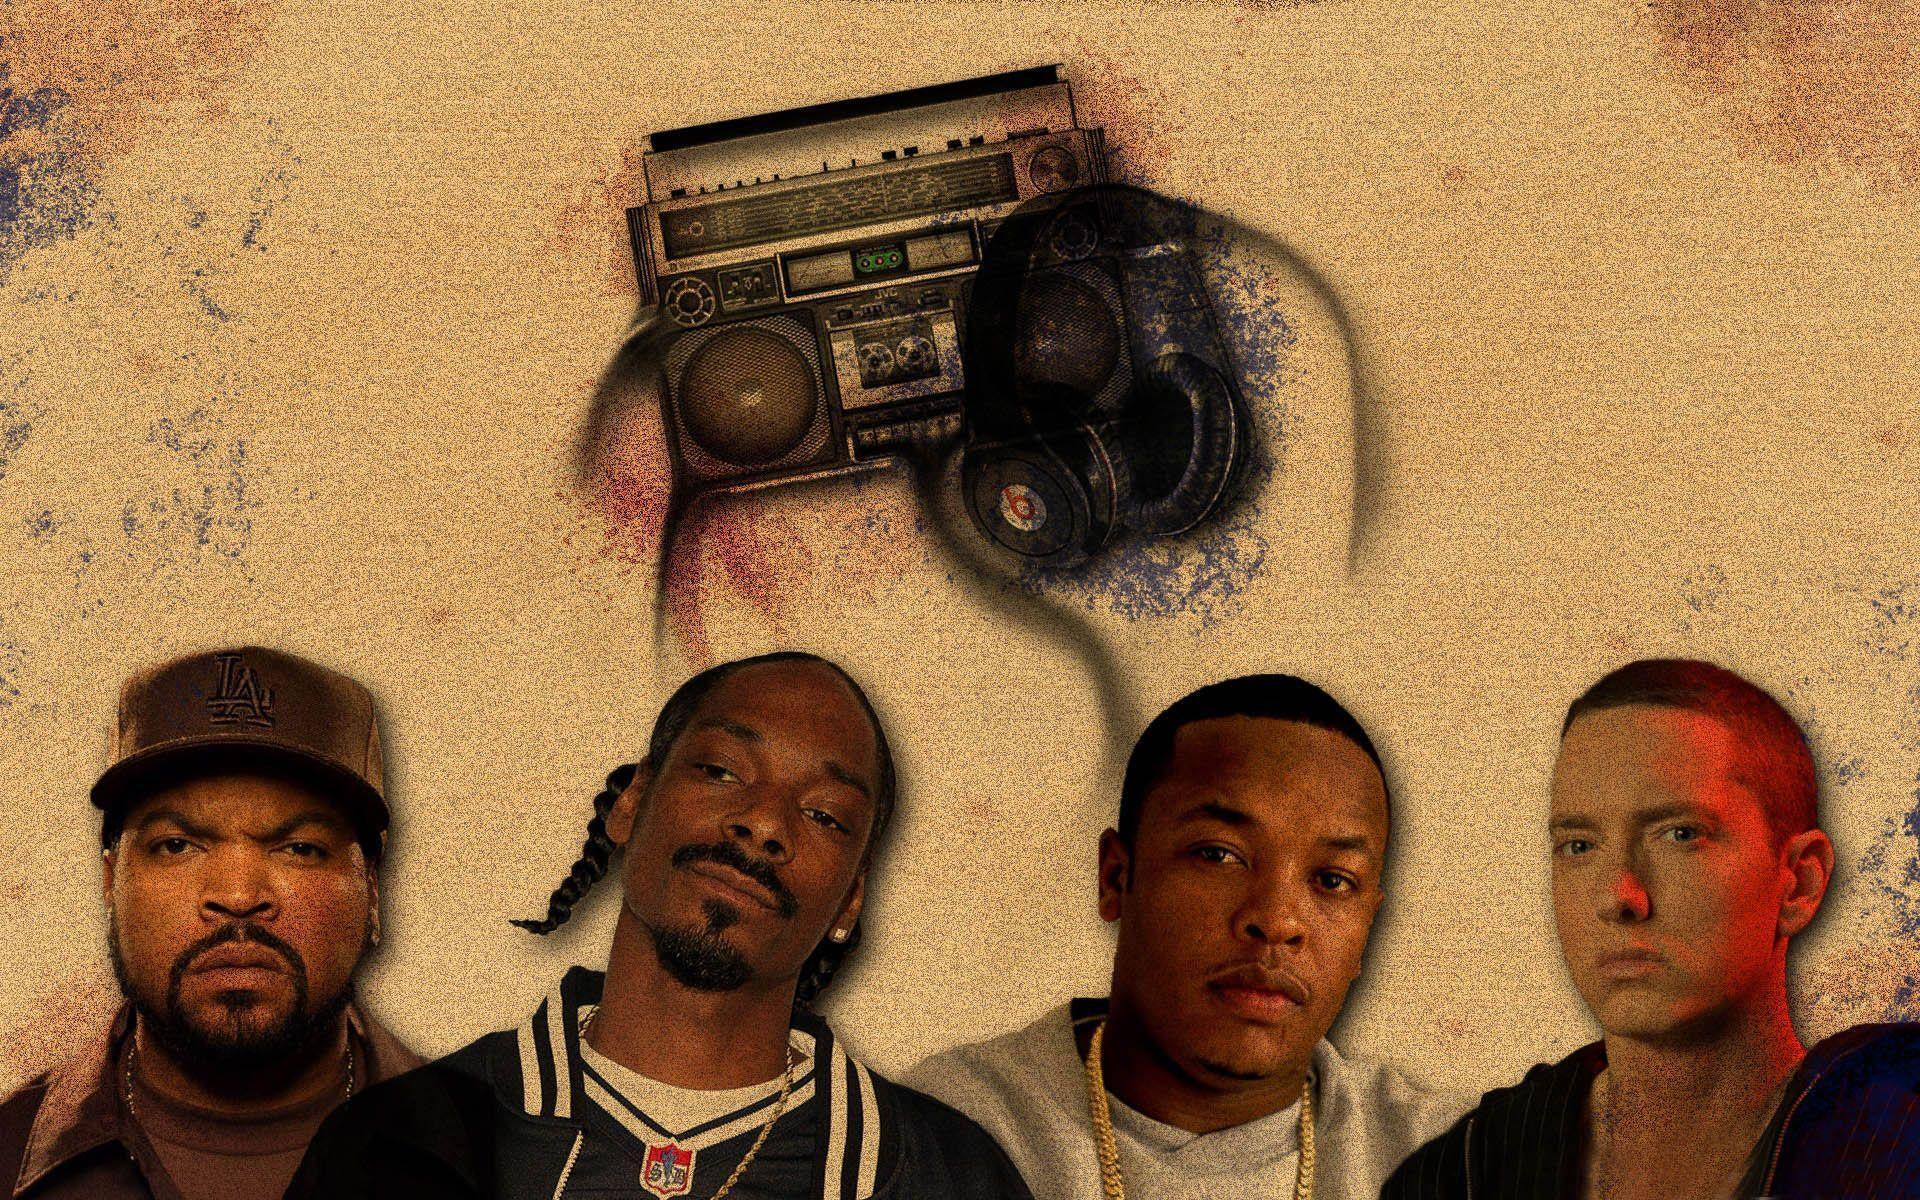 Ice Cube, Snoop Dogg, Dr. Dre, Eminem Wallpaper Wide or HD. Male